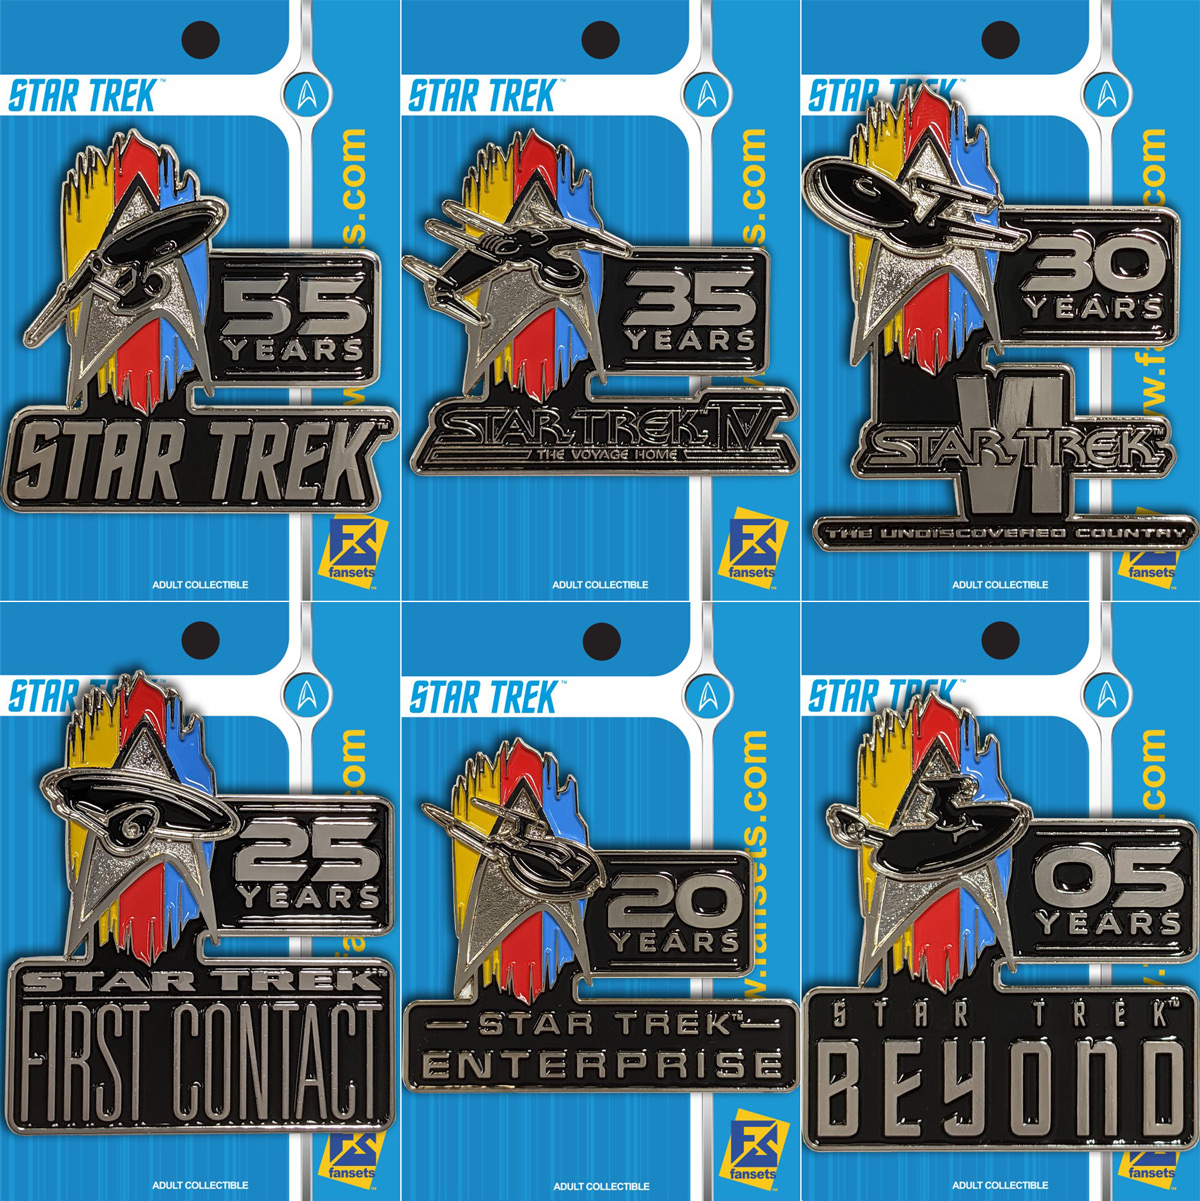 Star Trek Discovery U.S.S SHENZHOU Licensed FanSets MicroFleet Collector’s Pin 